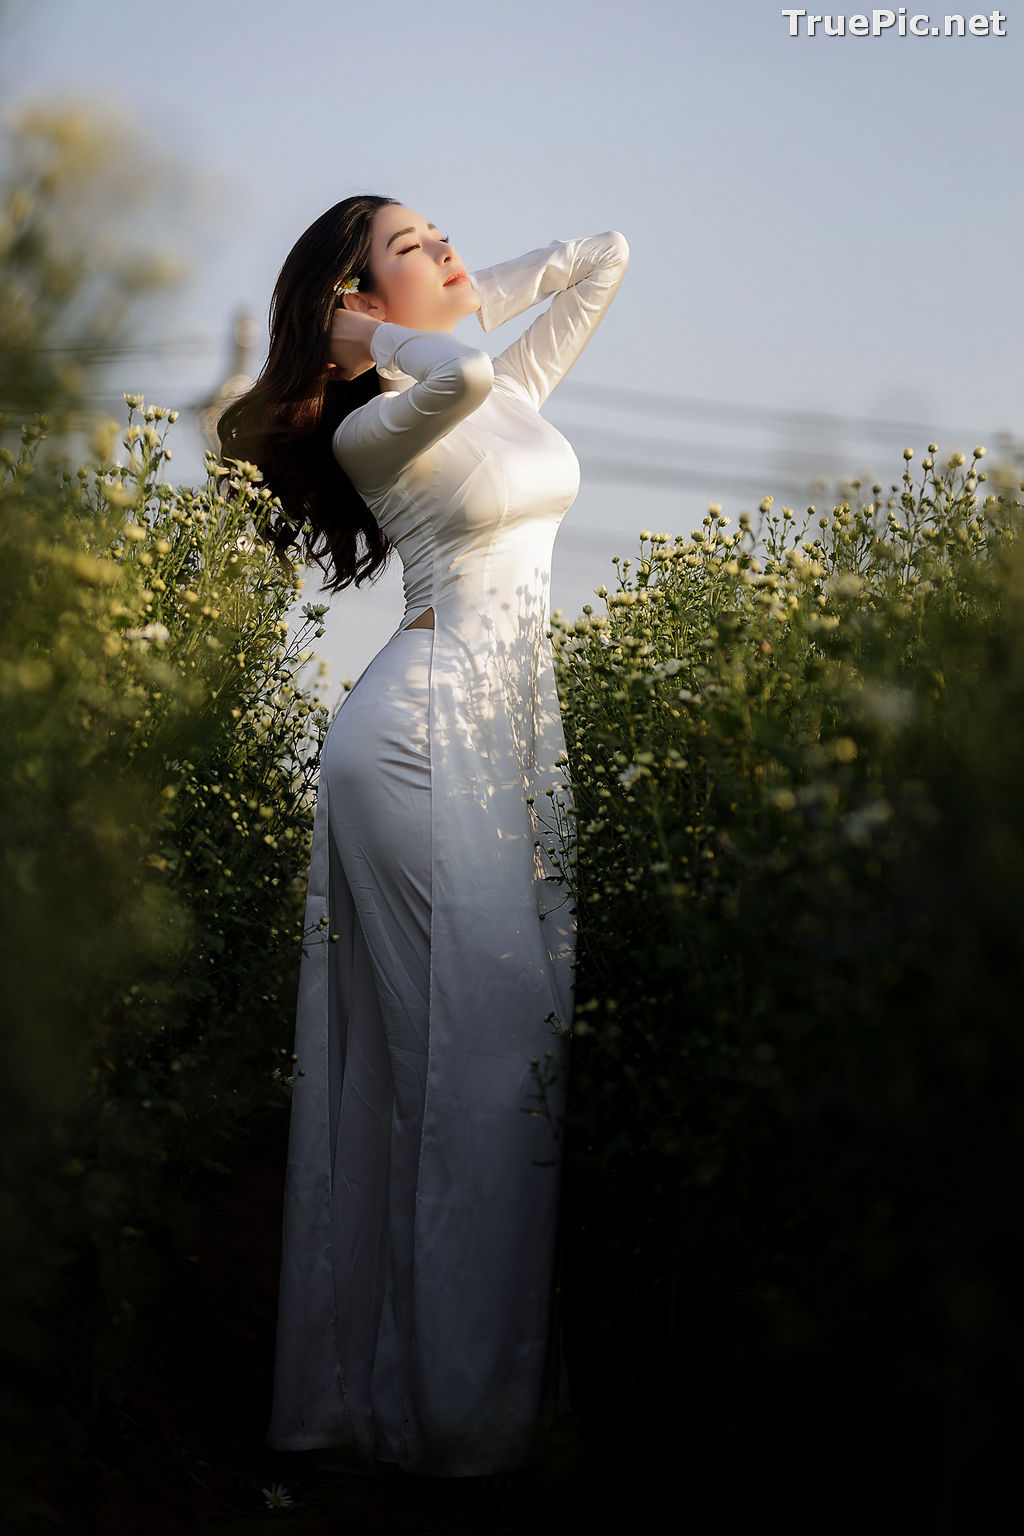 Image The Beauty of Vietnamese Girls with Traditional Dress (Ao Dai) #5 - TruePic.net - Picture-15